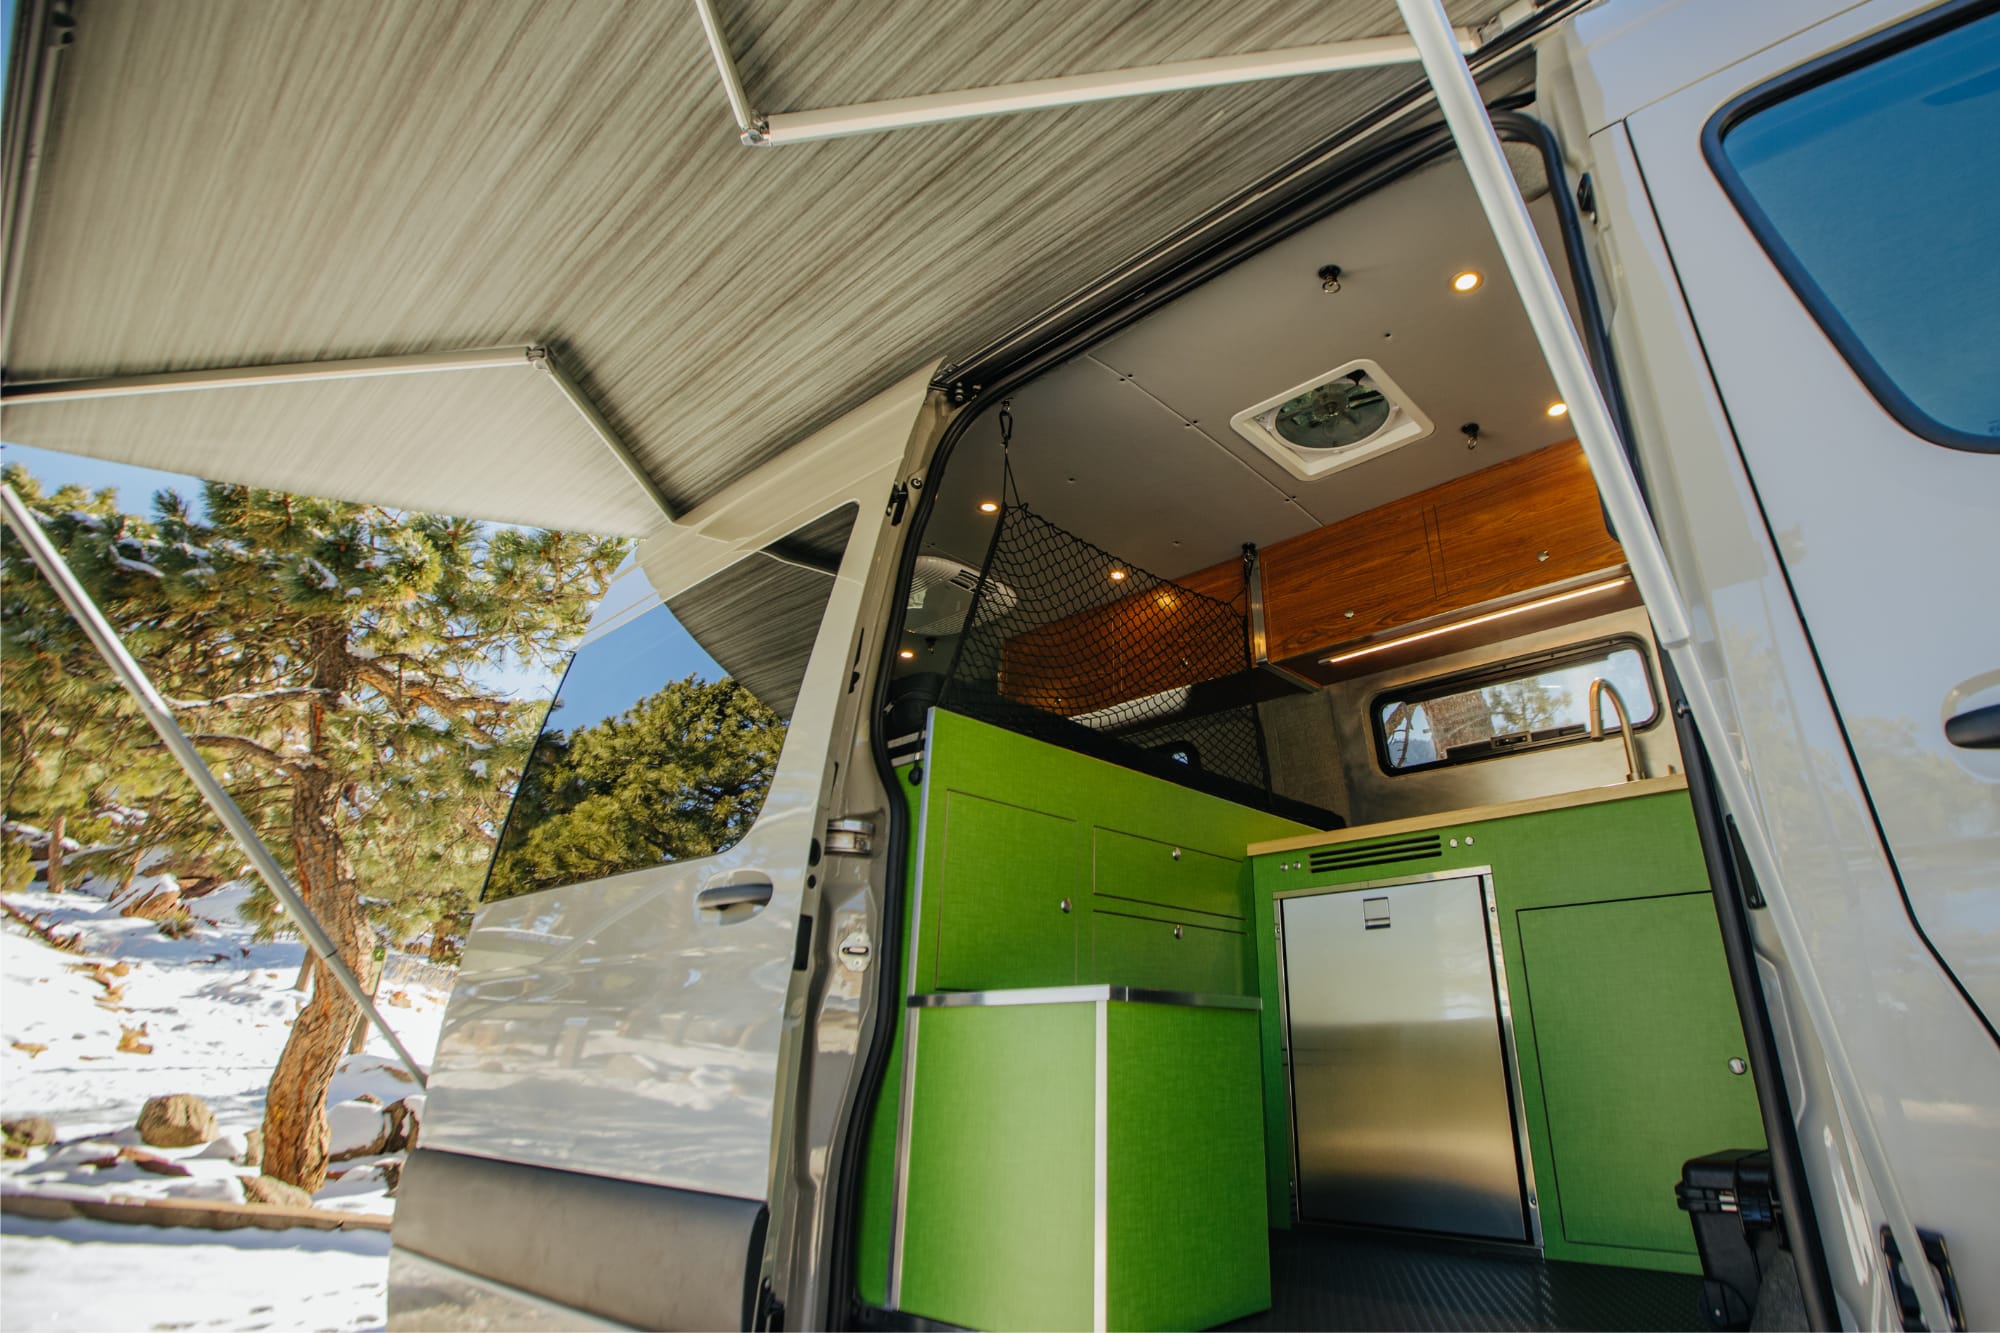 A close-up view into a camper van through the side door. All the cabinetry is bright green.